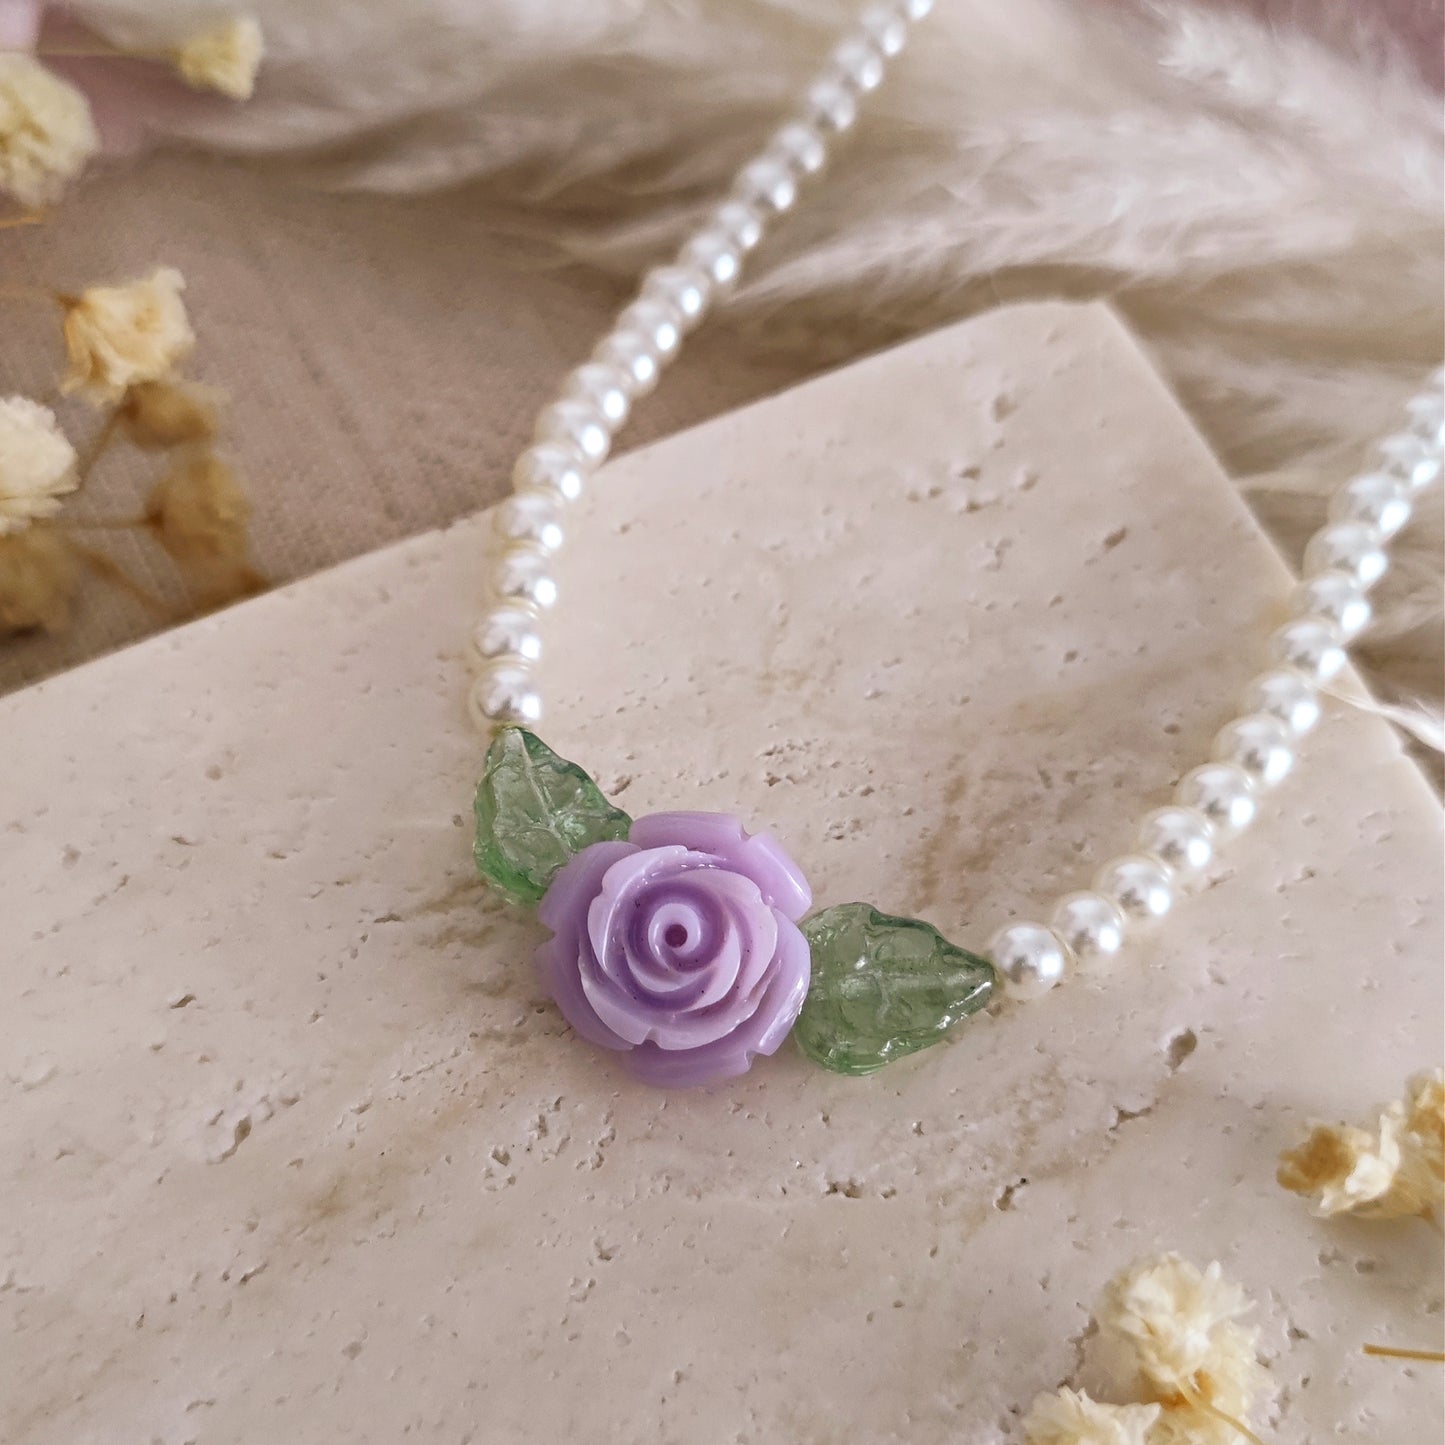 Necklace of glass pearls, leaves and lilac rose in resin // SADIE